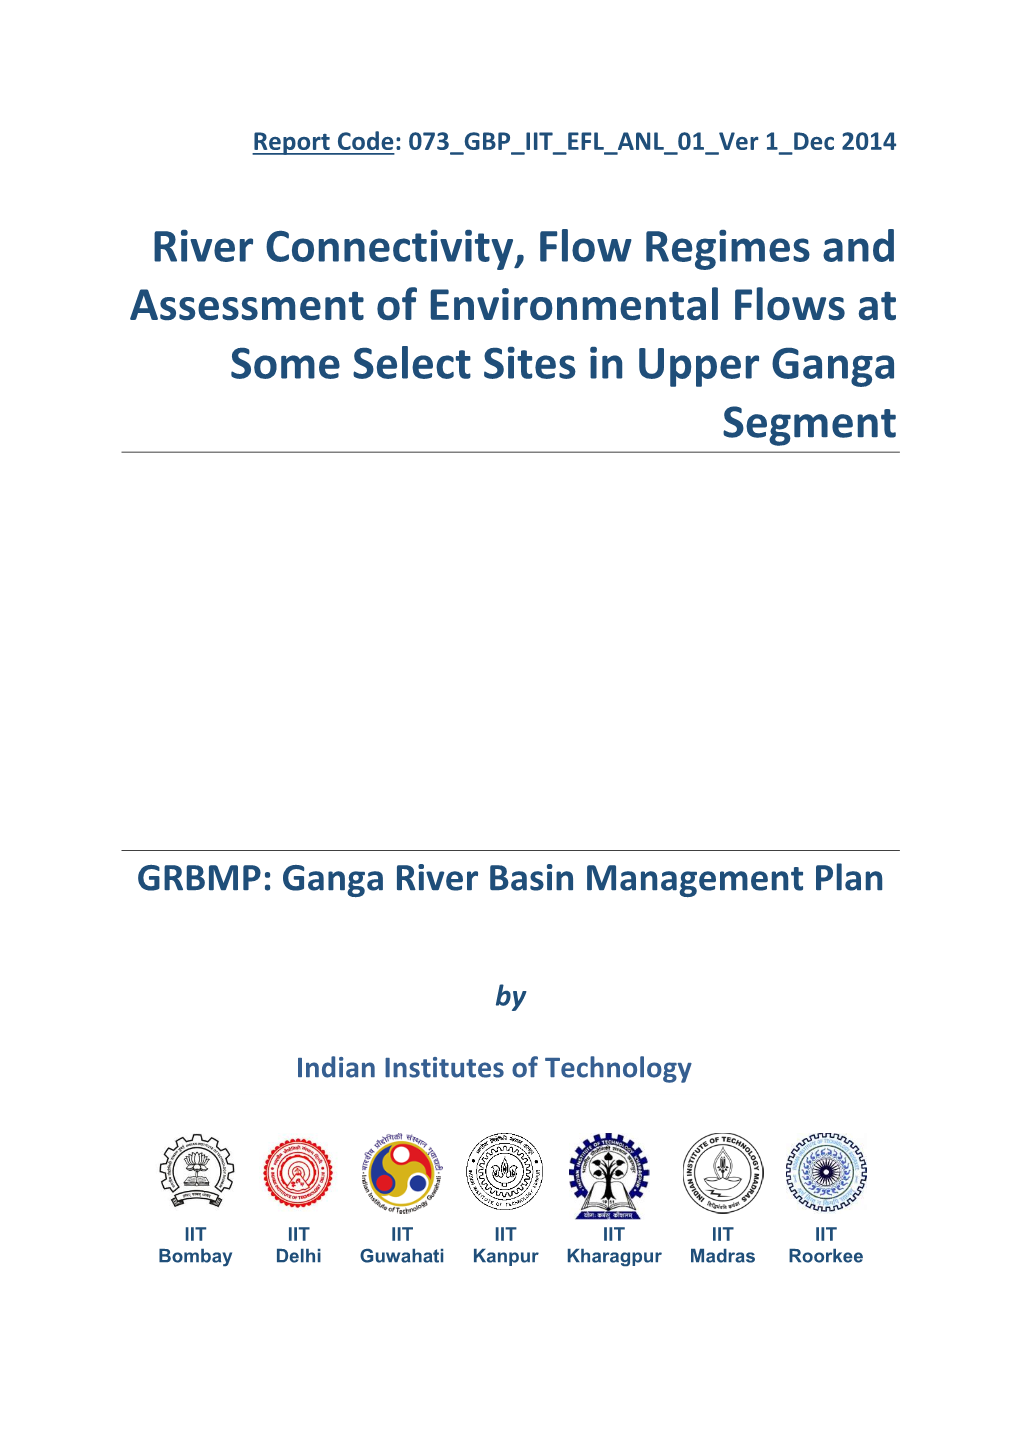 River Connectivity, Flow Regimes and Assessment of Environmental Flows at Some Select Sites in Upper Ganga Segment